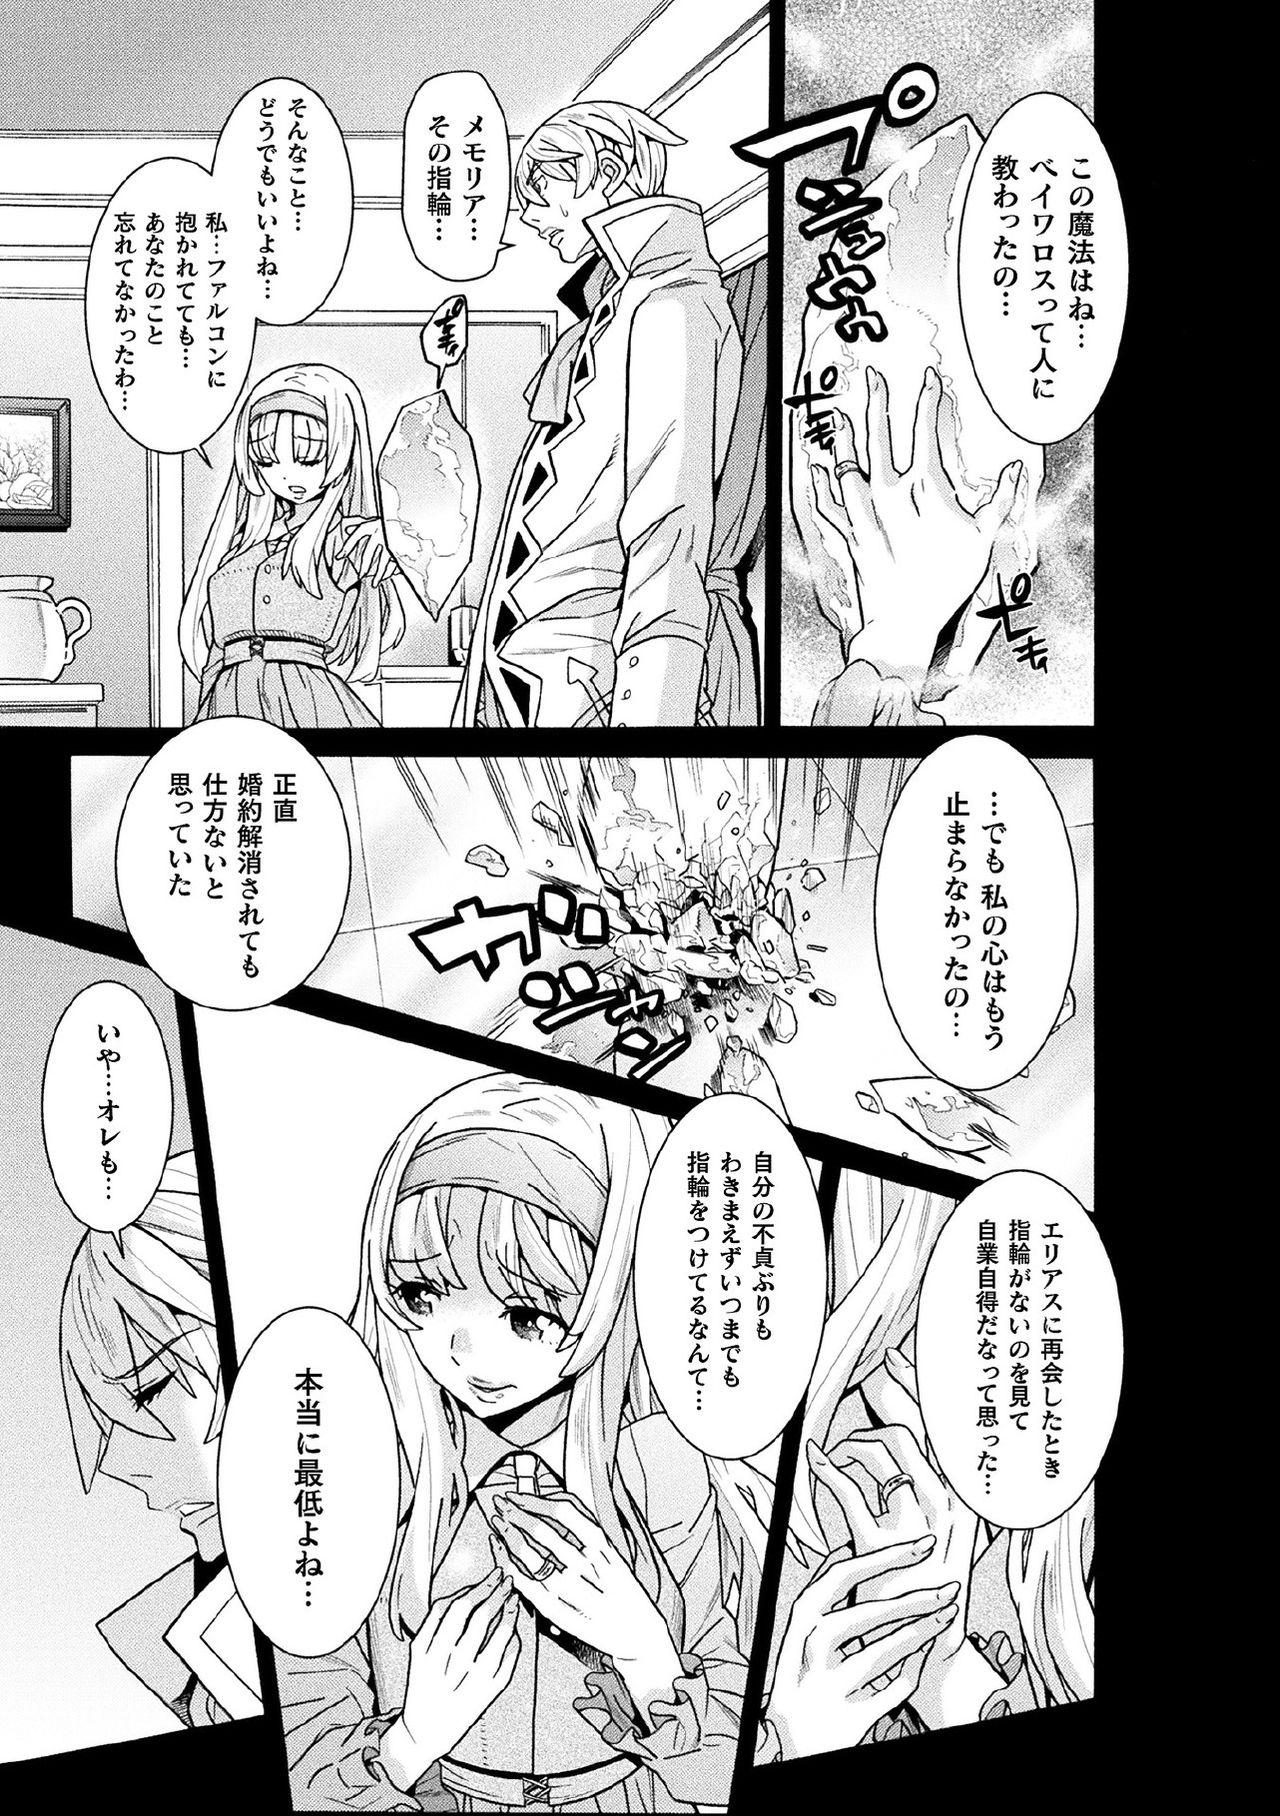 Japanese Makenshi Leane the COMIC Episode 6 Gorgeous - Page 5